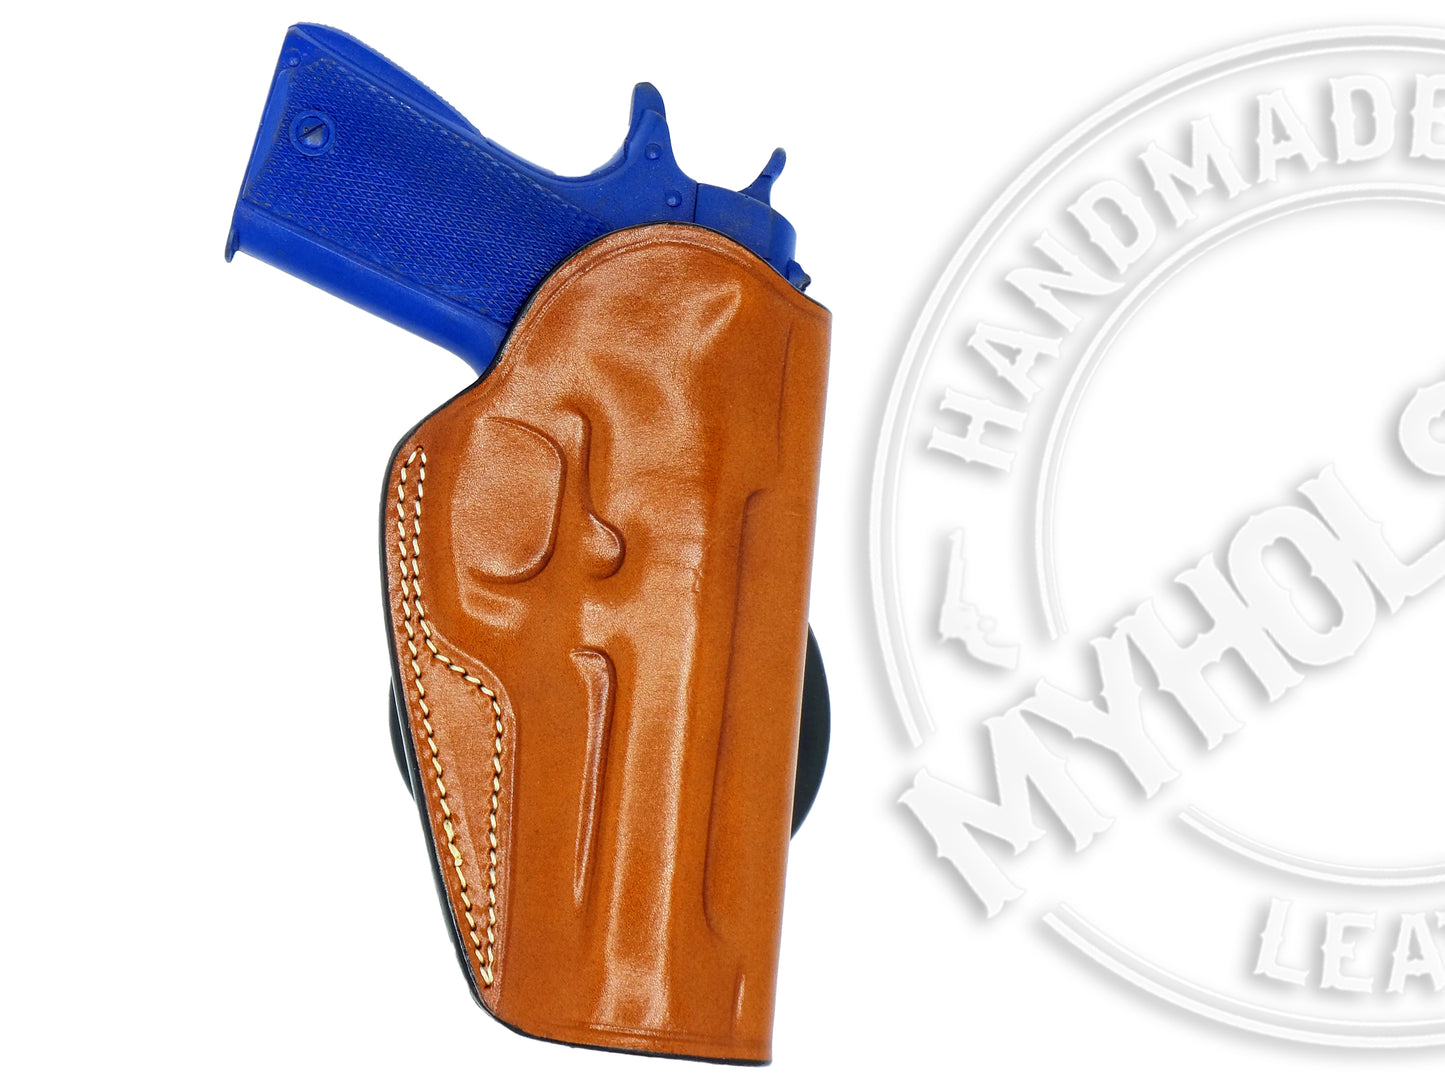 CZ 75 SP-01 Phantom OWB Quick Draw Right Hand Leather Paddle Holster